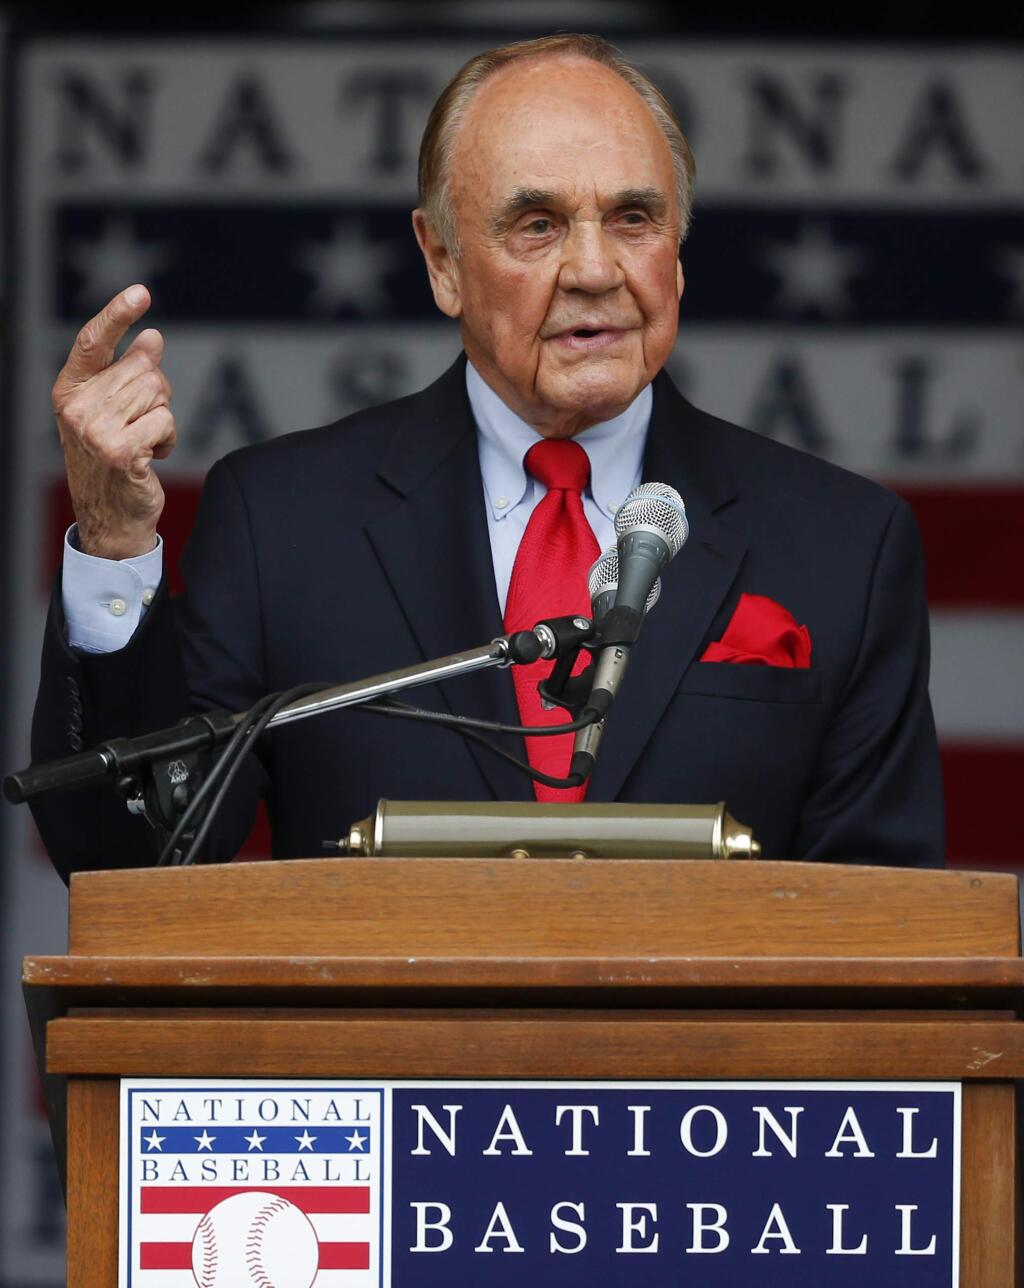 In this July 25, 2015, file photo, Dick Enberg speaks after receiving the Ford C. Frick Award during a ceremony at Doubleday Field in Cooperstown, N.Y. Enberg, the sportscaster who got his big break with UCLA basketball and went on to call Super Bowls, Olympics, Final Fours and Angels and Padres baseball games, died Thursday, Dec. 21, 2017. He was 82. (AP Photo/Mike Groll, File)